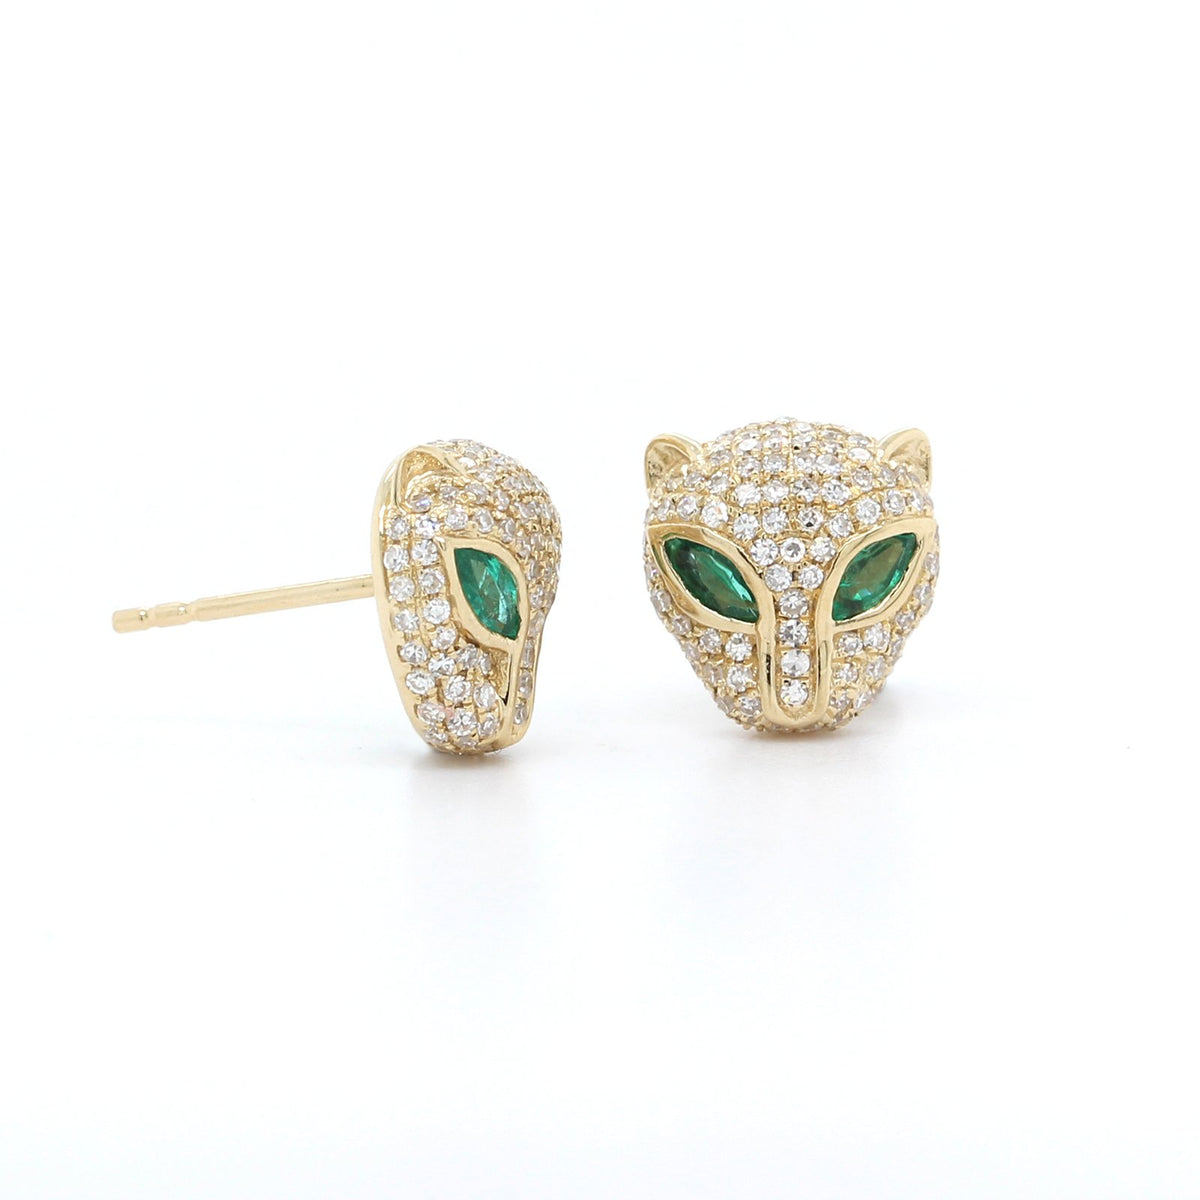 14K Yellow Gold Panther Diamond and Emerald Stud Earrings